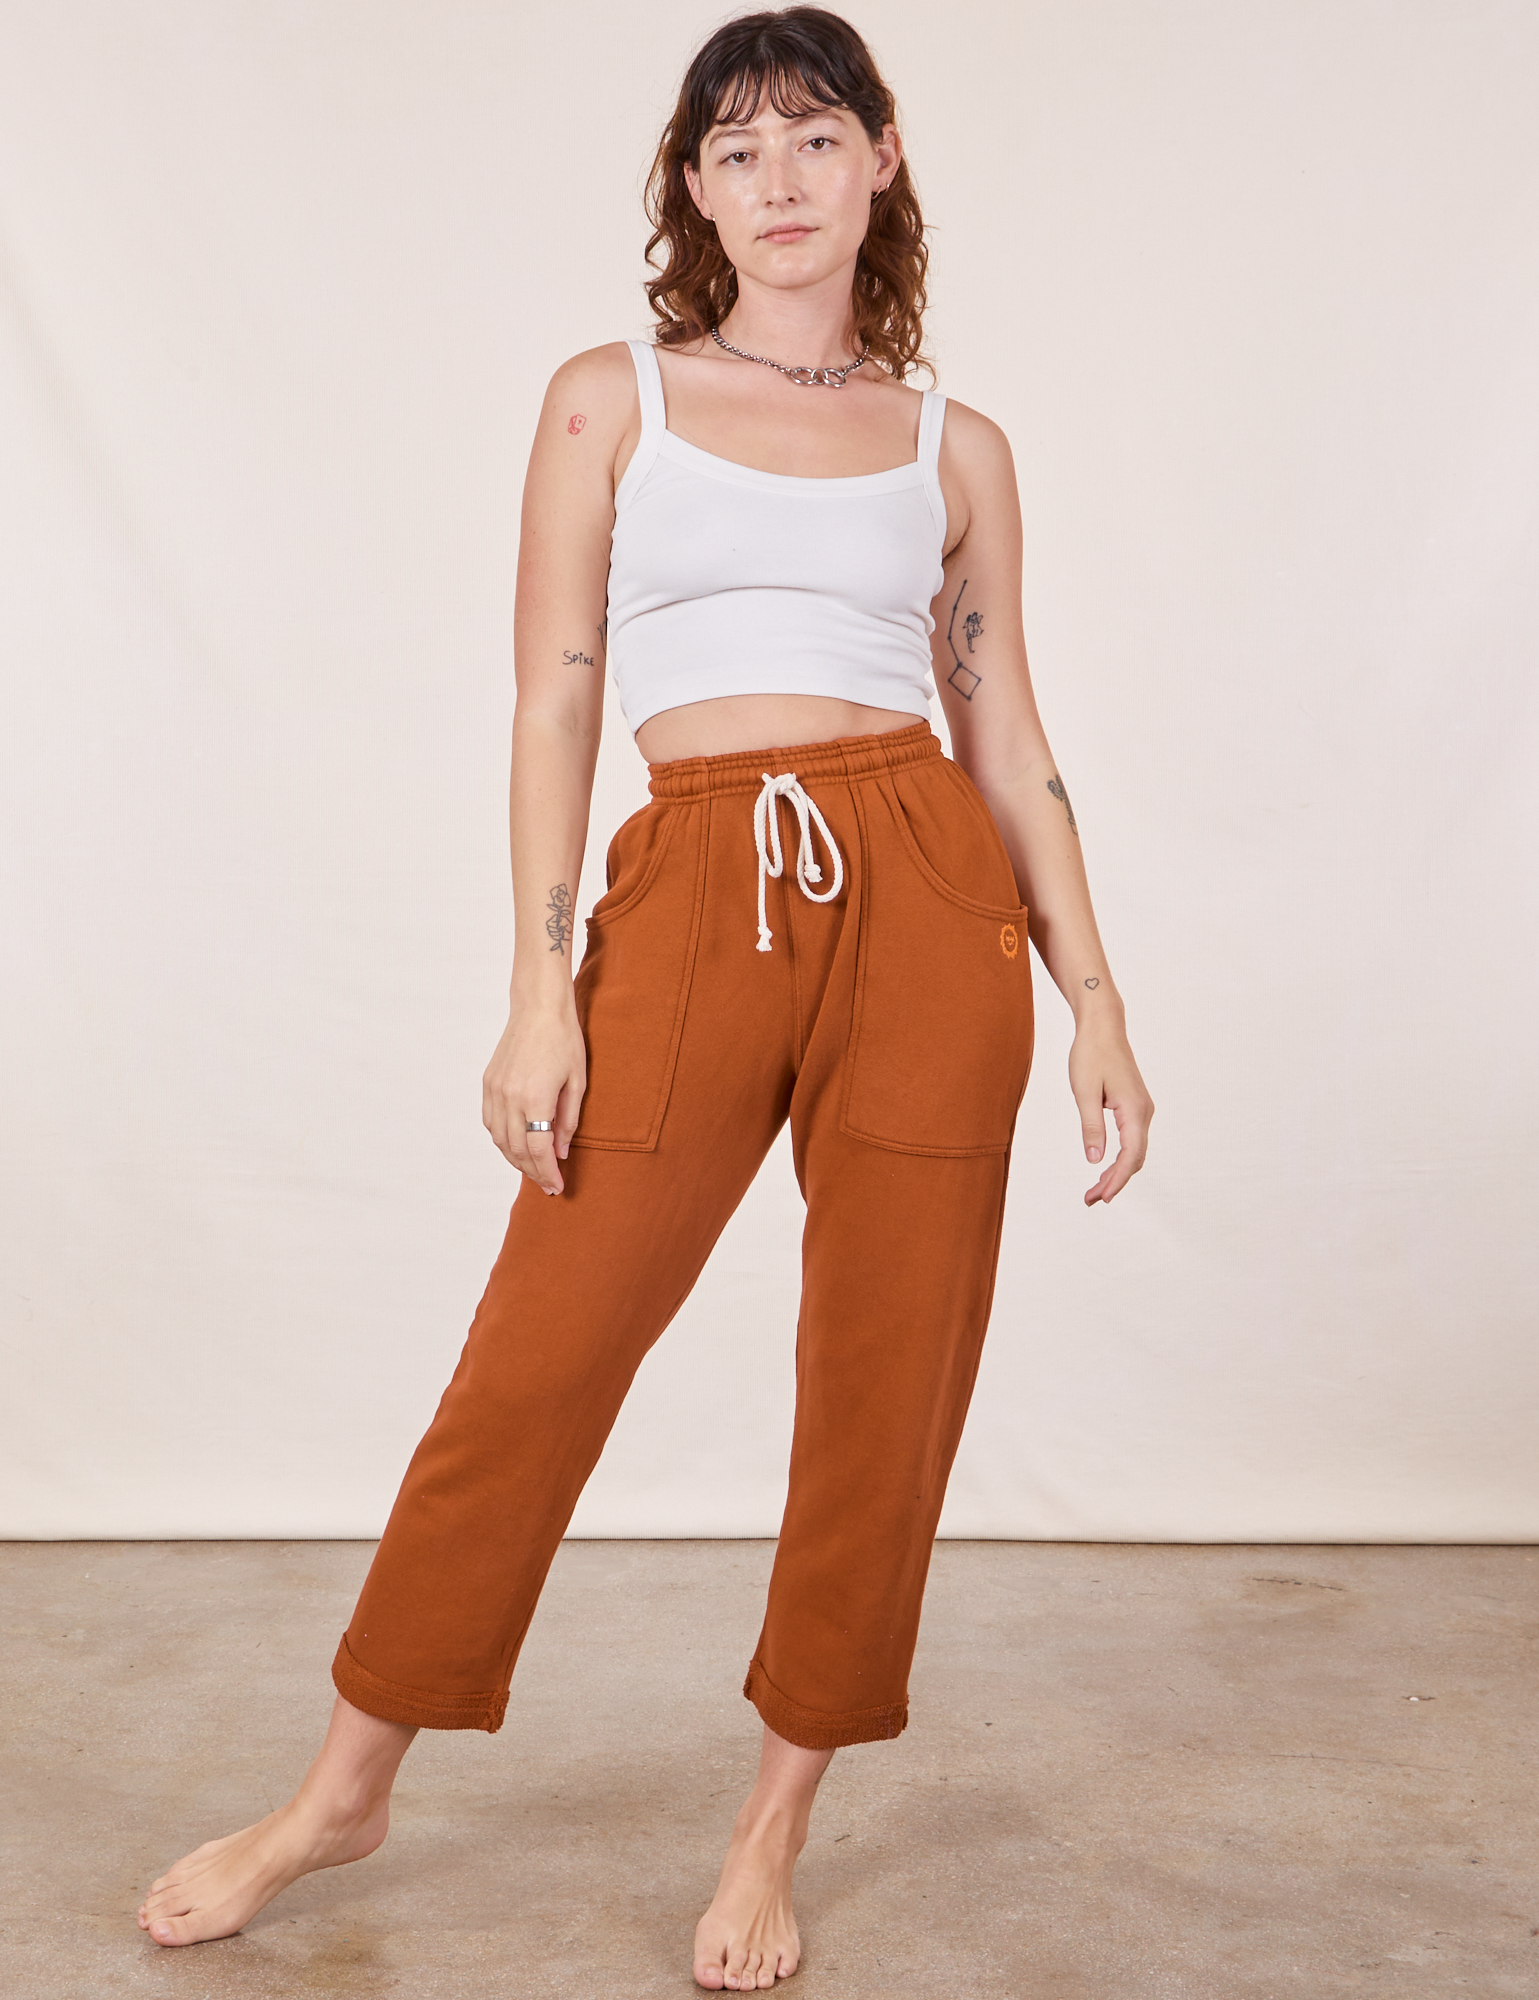 Alex is wearing Cropped Rolled Cuff Sweatpants in Burnt Terracotta and vintage off-white Cami